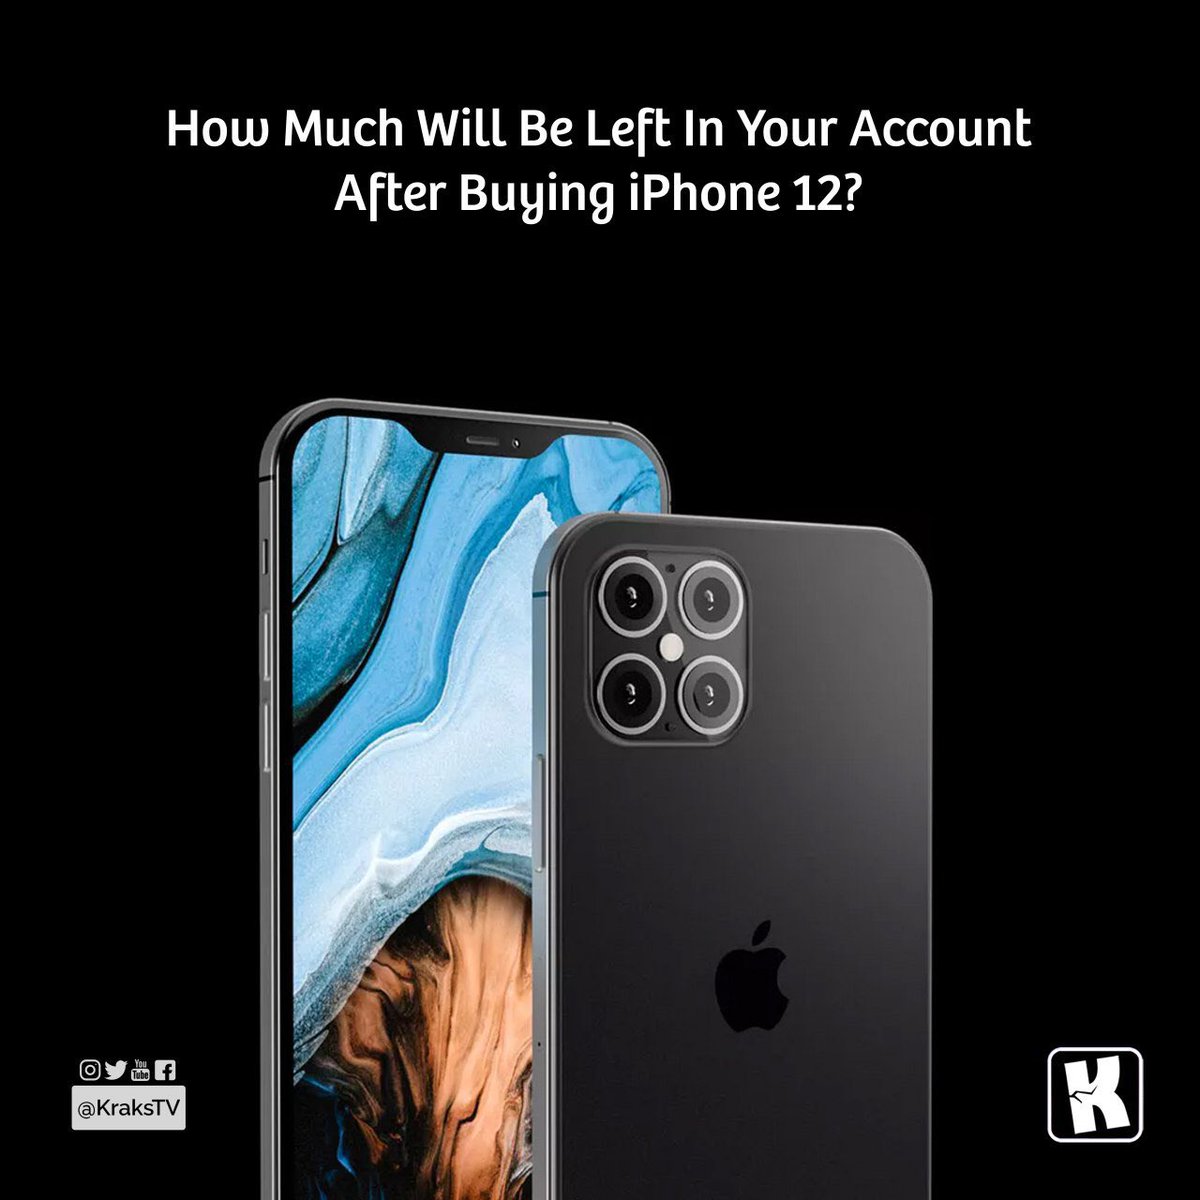 How much will be left in your account after buying iPhone 12???